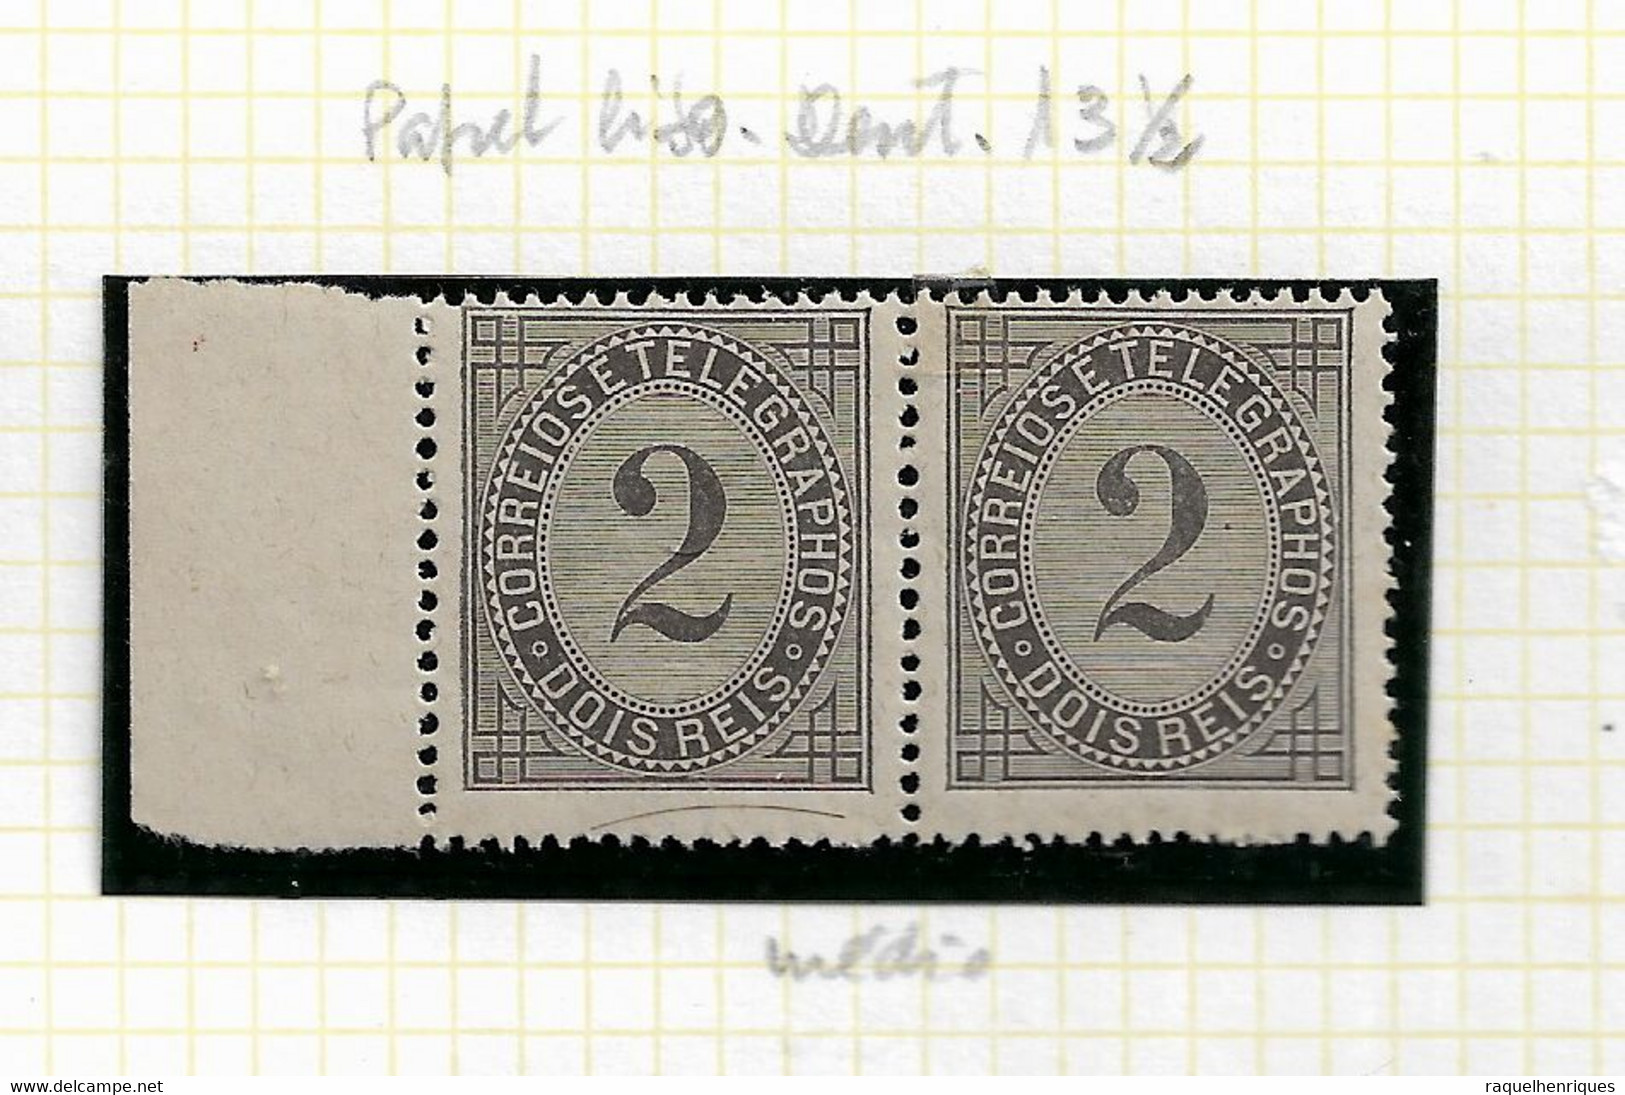 PORTUGAL STAMP - 1884 Telegraph Stamp P.LISO Perf:13½  Md#59a PAIR MNH (LPT1#195) - Ungebraucht